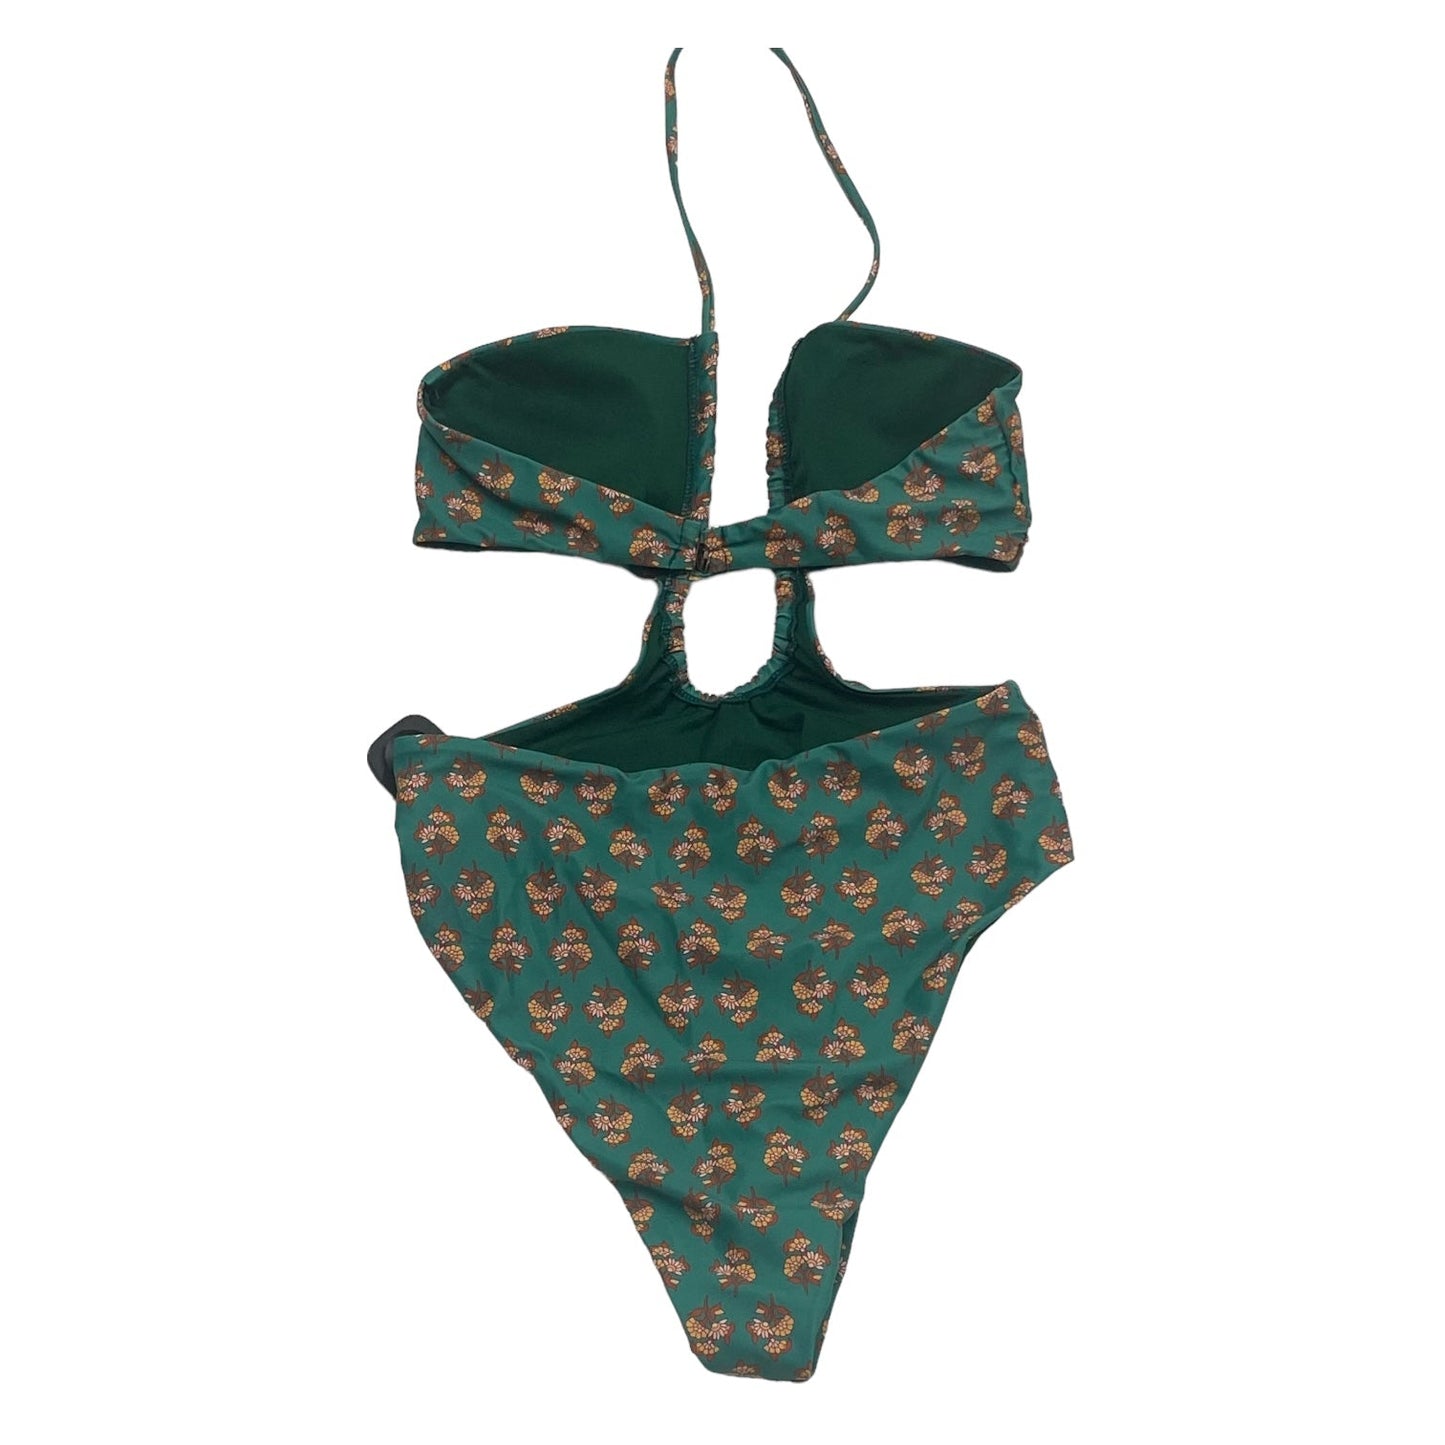 Green Swimsuit Cmc, Size S